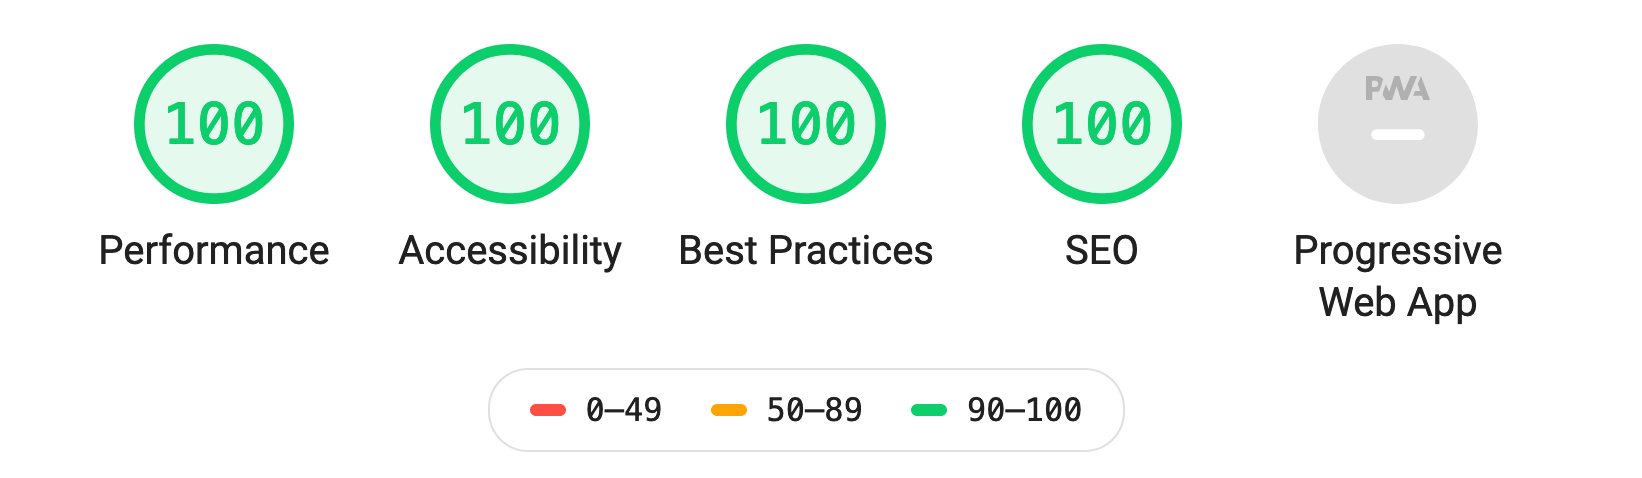 The lighthouse score for this website, showing separate 100/100 scores for Performance, Accessibility, Best Practices, and SEO